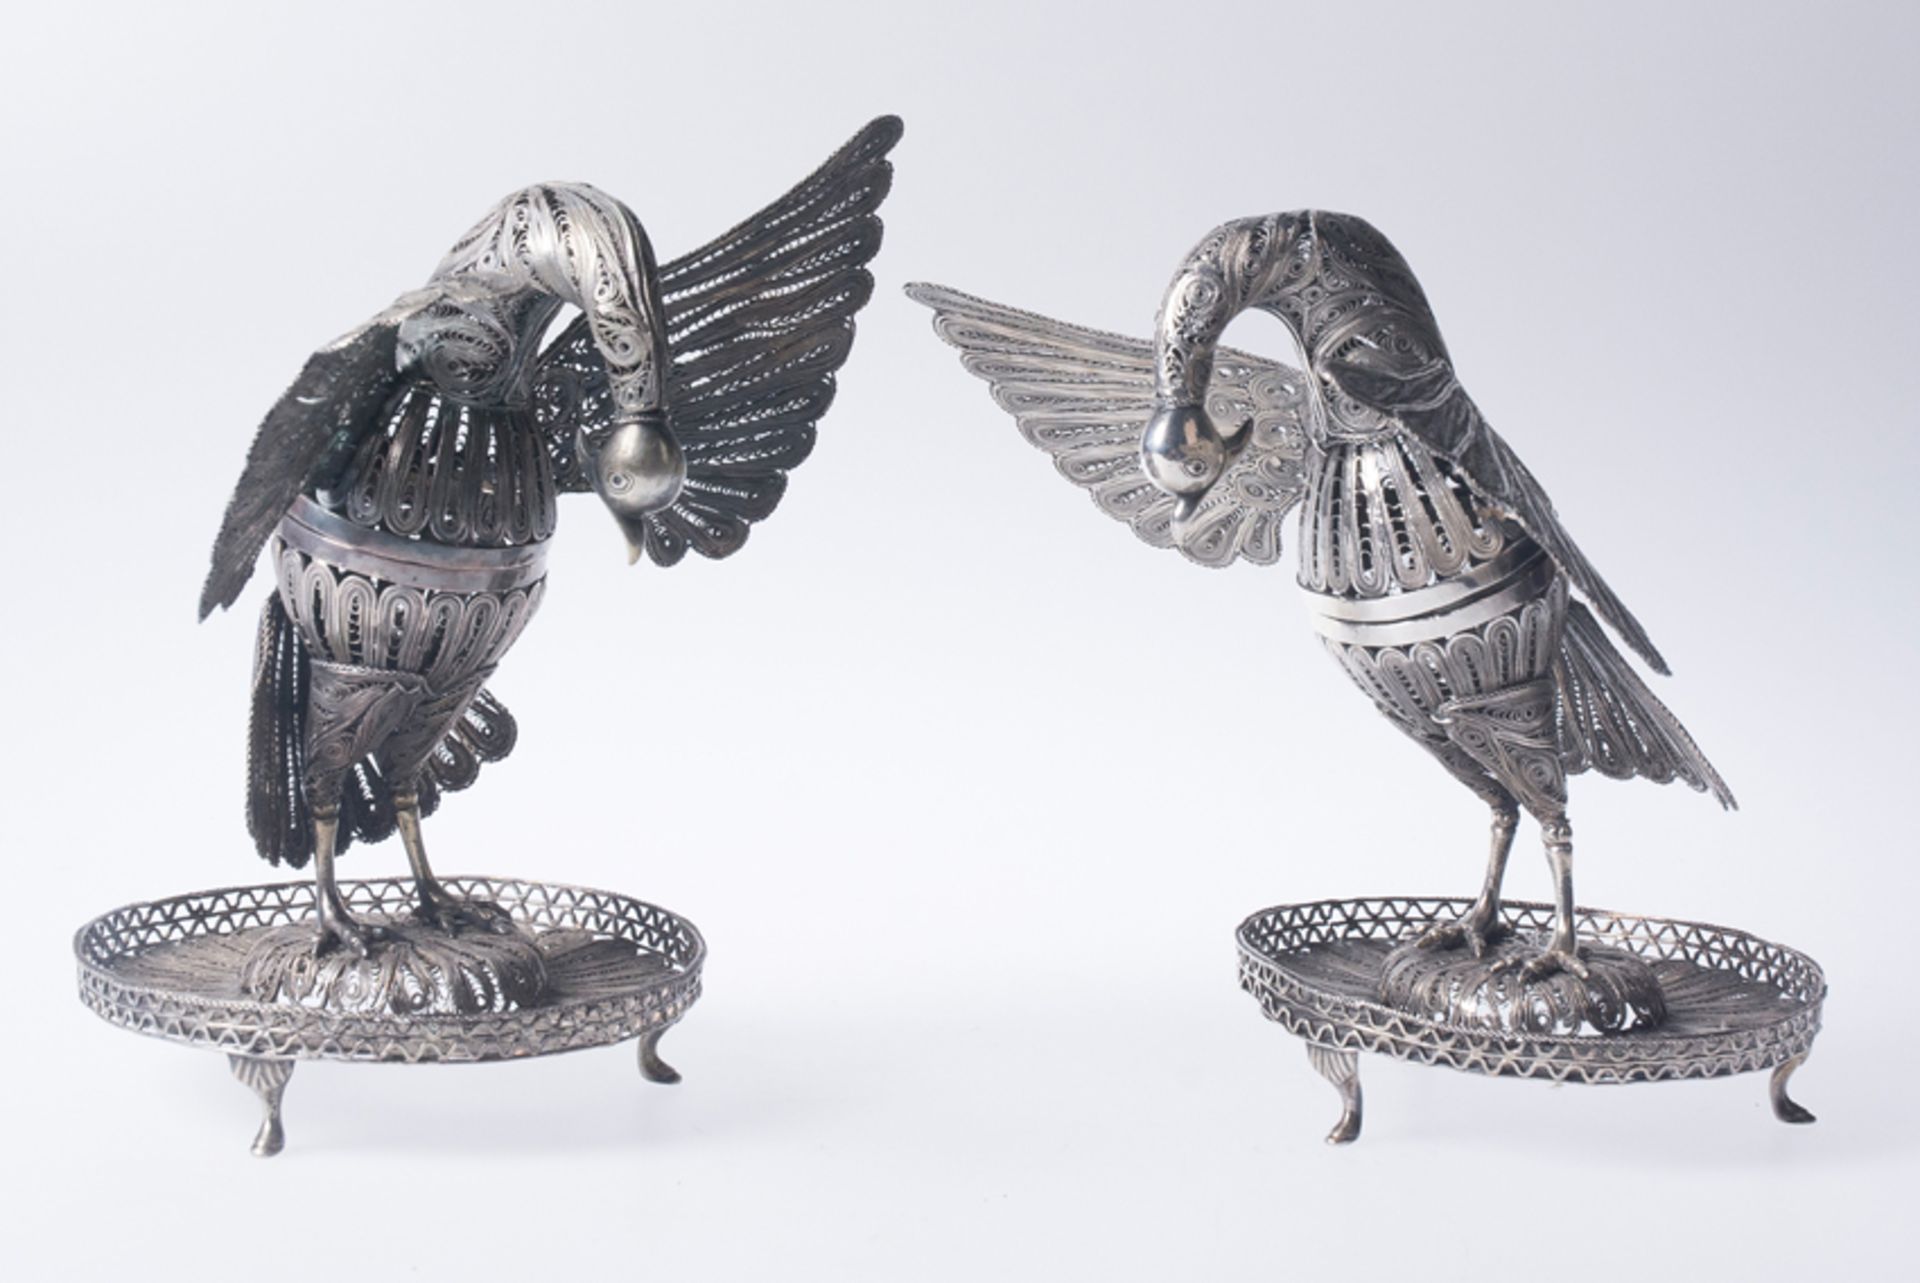 Pair of turkey-shaped incense burners in silver filigree, and fretworked and chased cast silver. Co